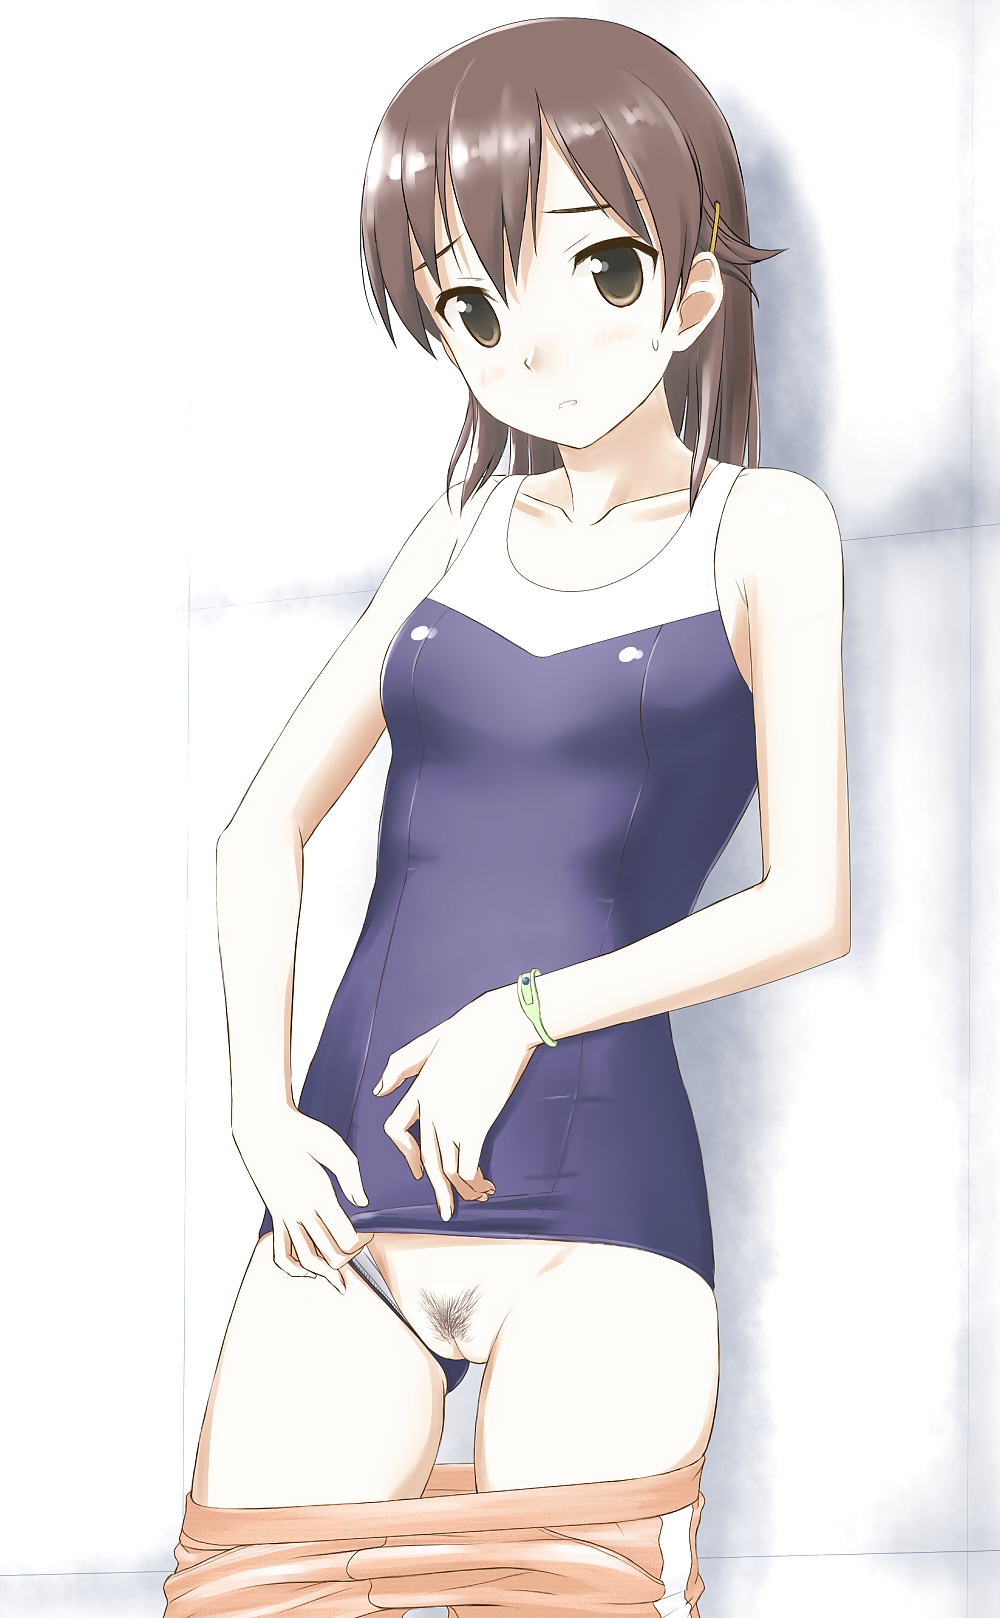 Anime girls in swimsuits #26275068